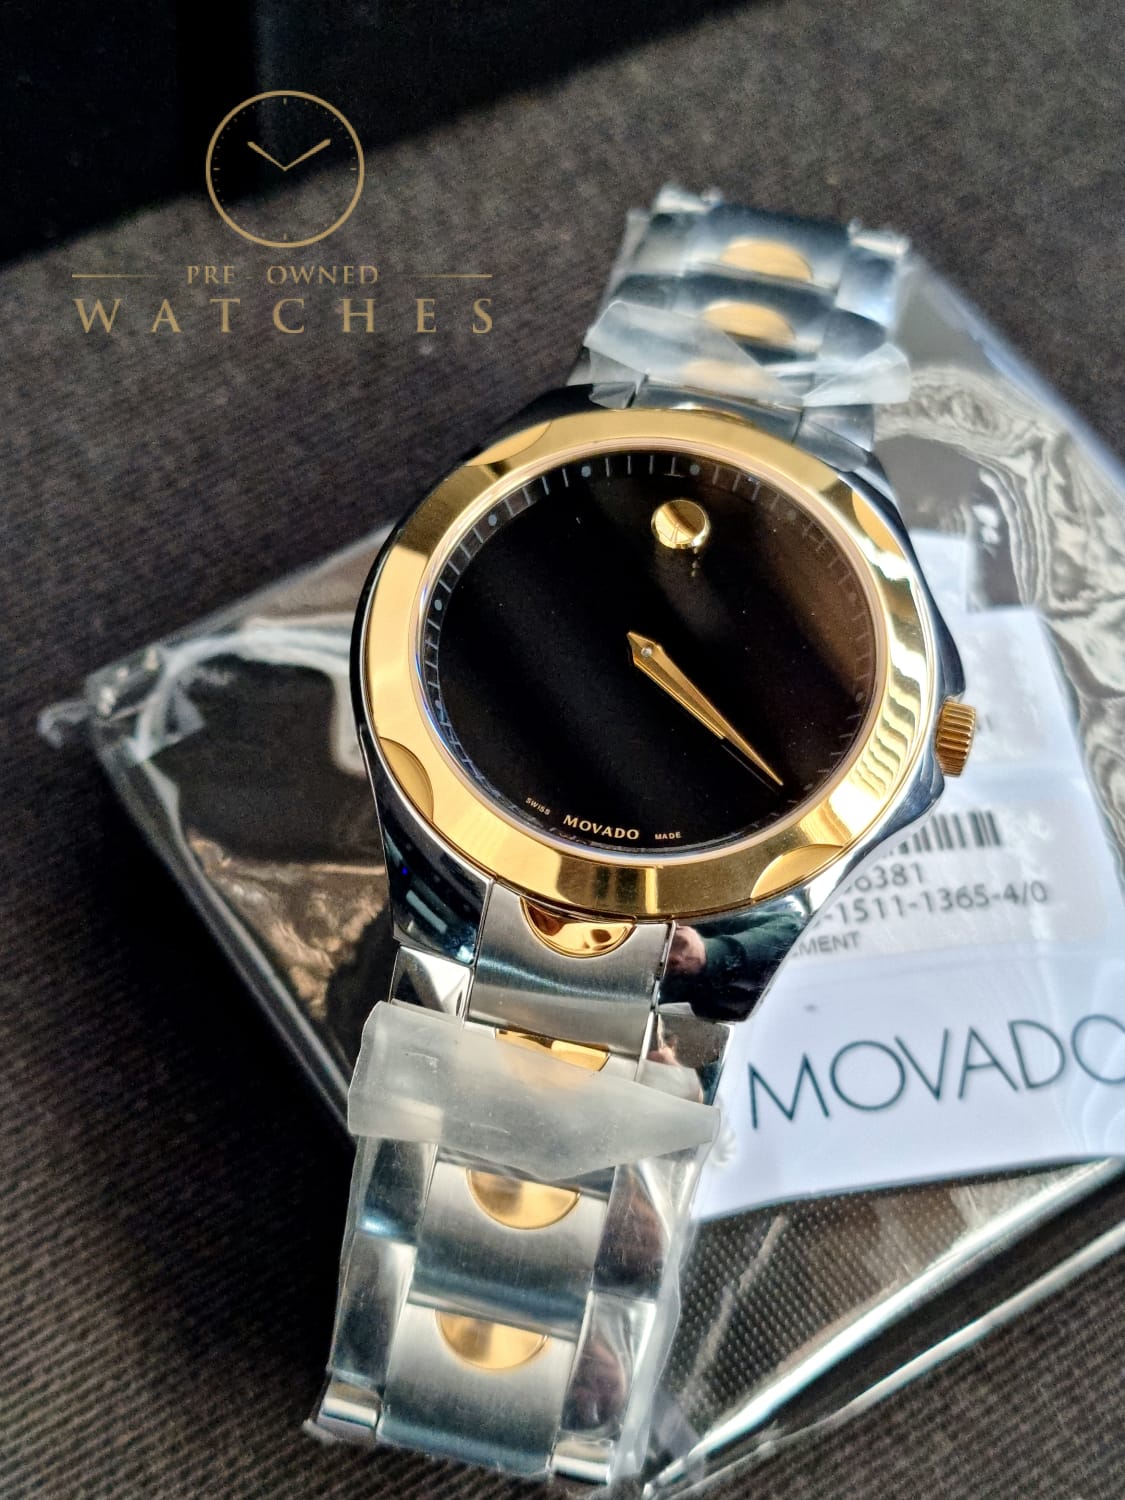 Movado Men’s Swiss Made Quartz Stainless Steel Black Dial 40mm Watch 0606381